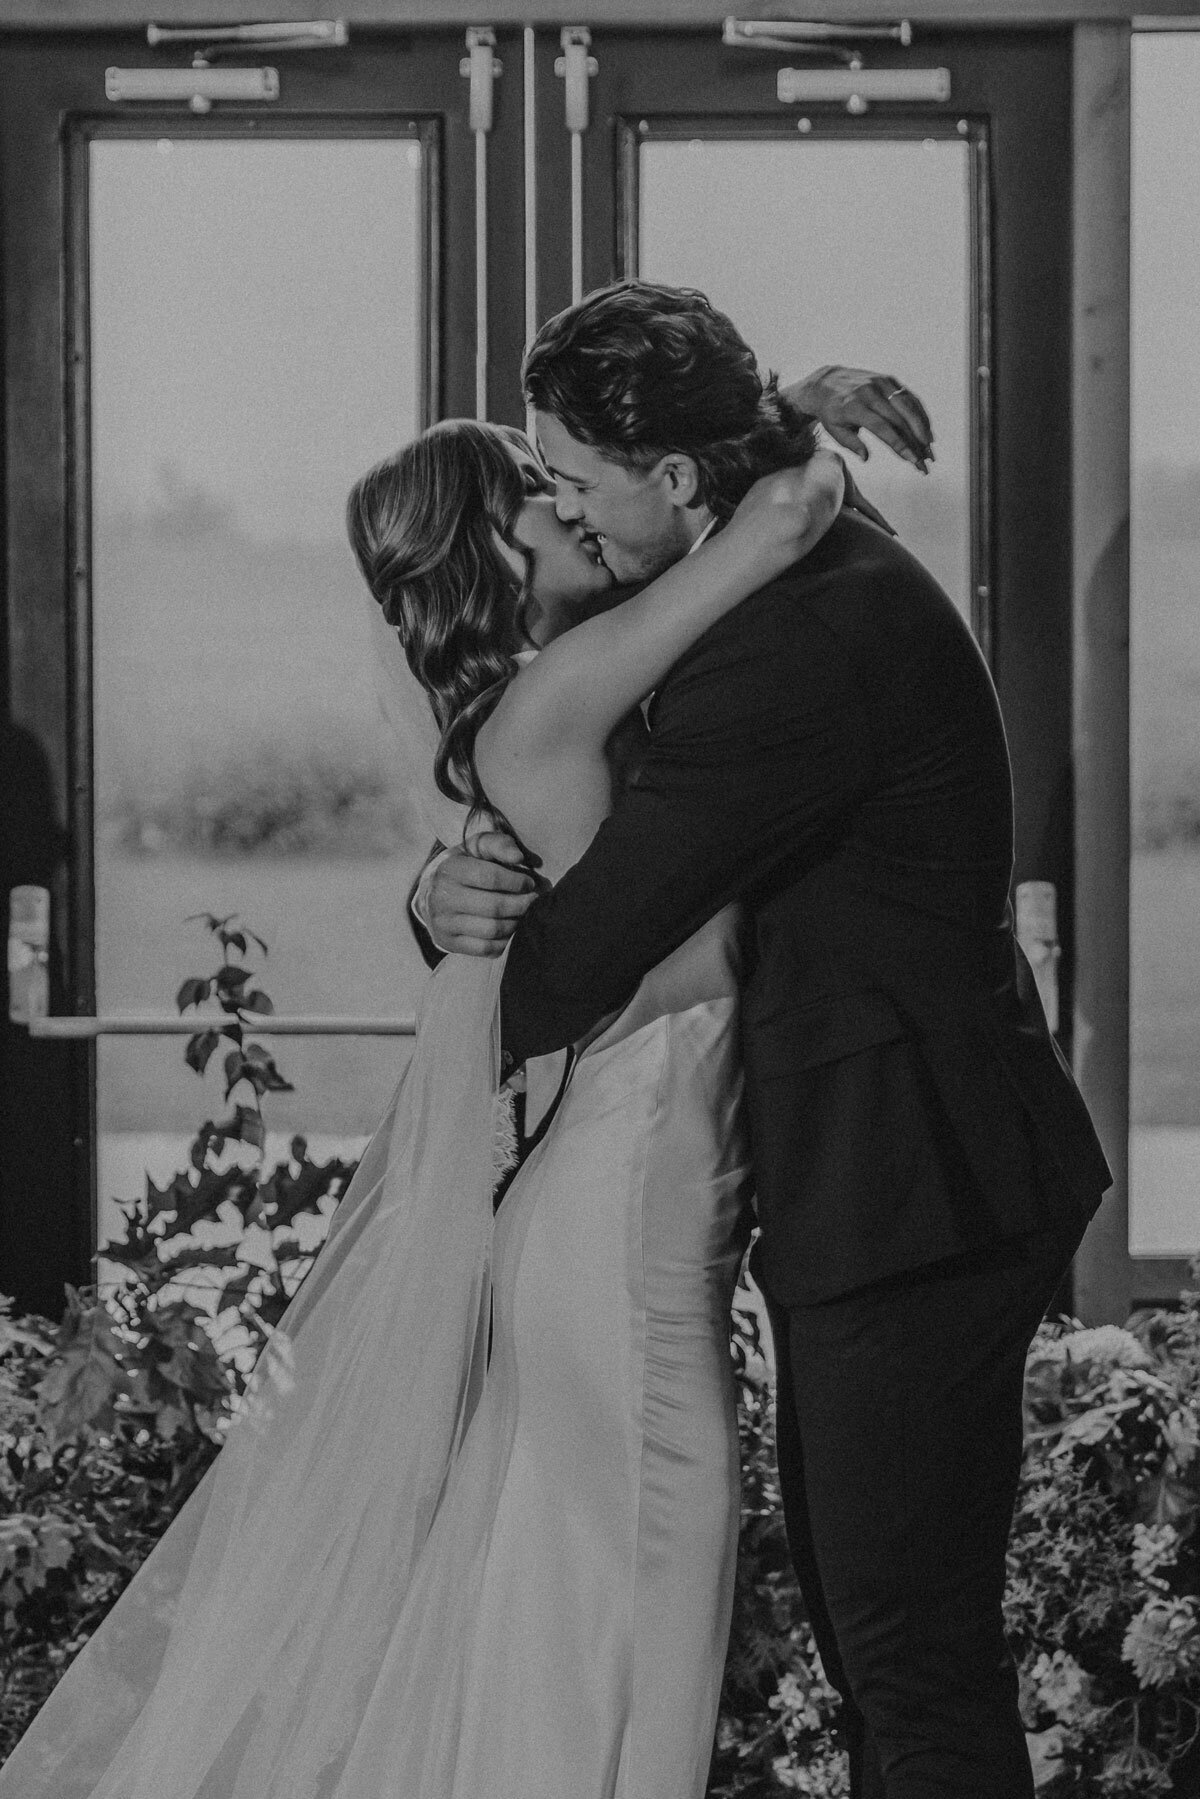 Black and white photo of bride and groom sharing their first kiss as husband and wife.